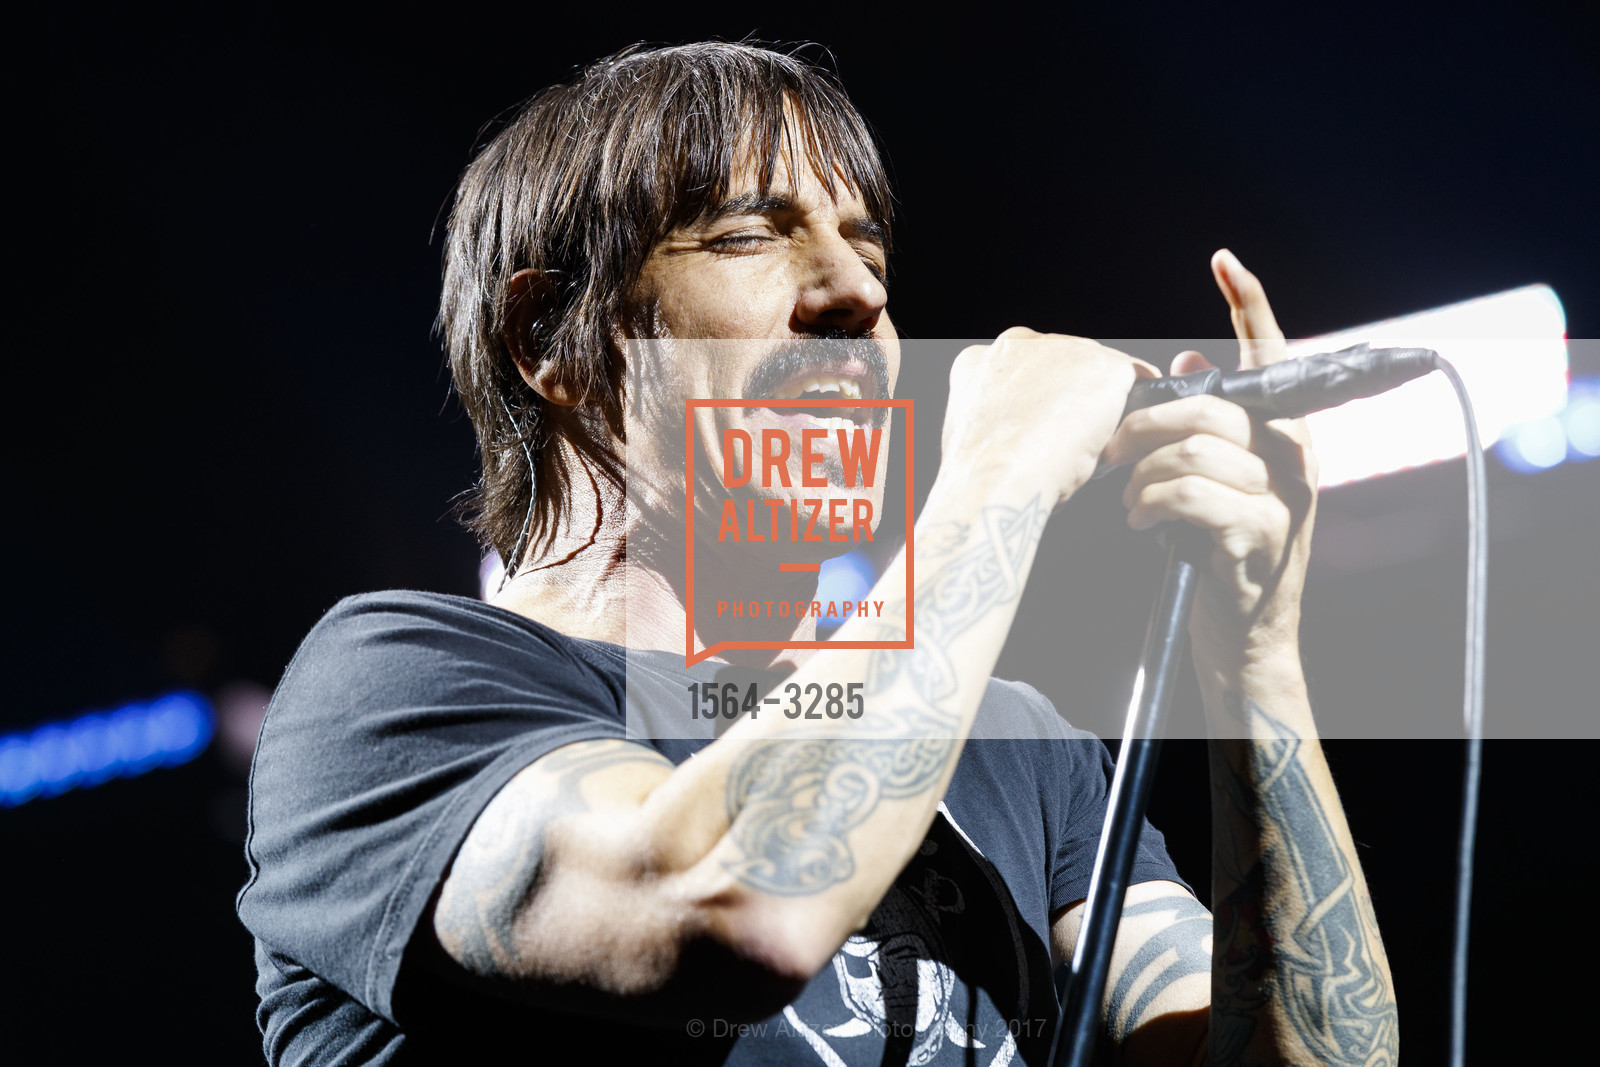 The Red Hot Chili Peppers, Photo #1564-3285